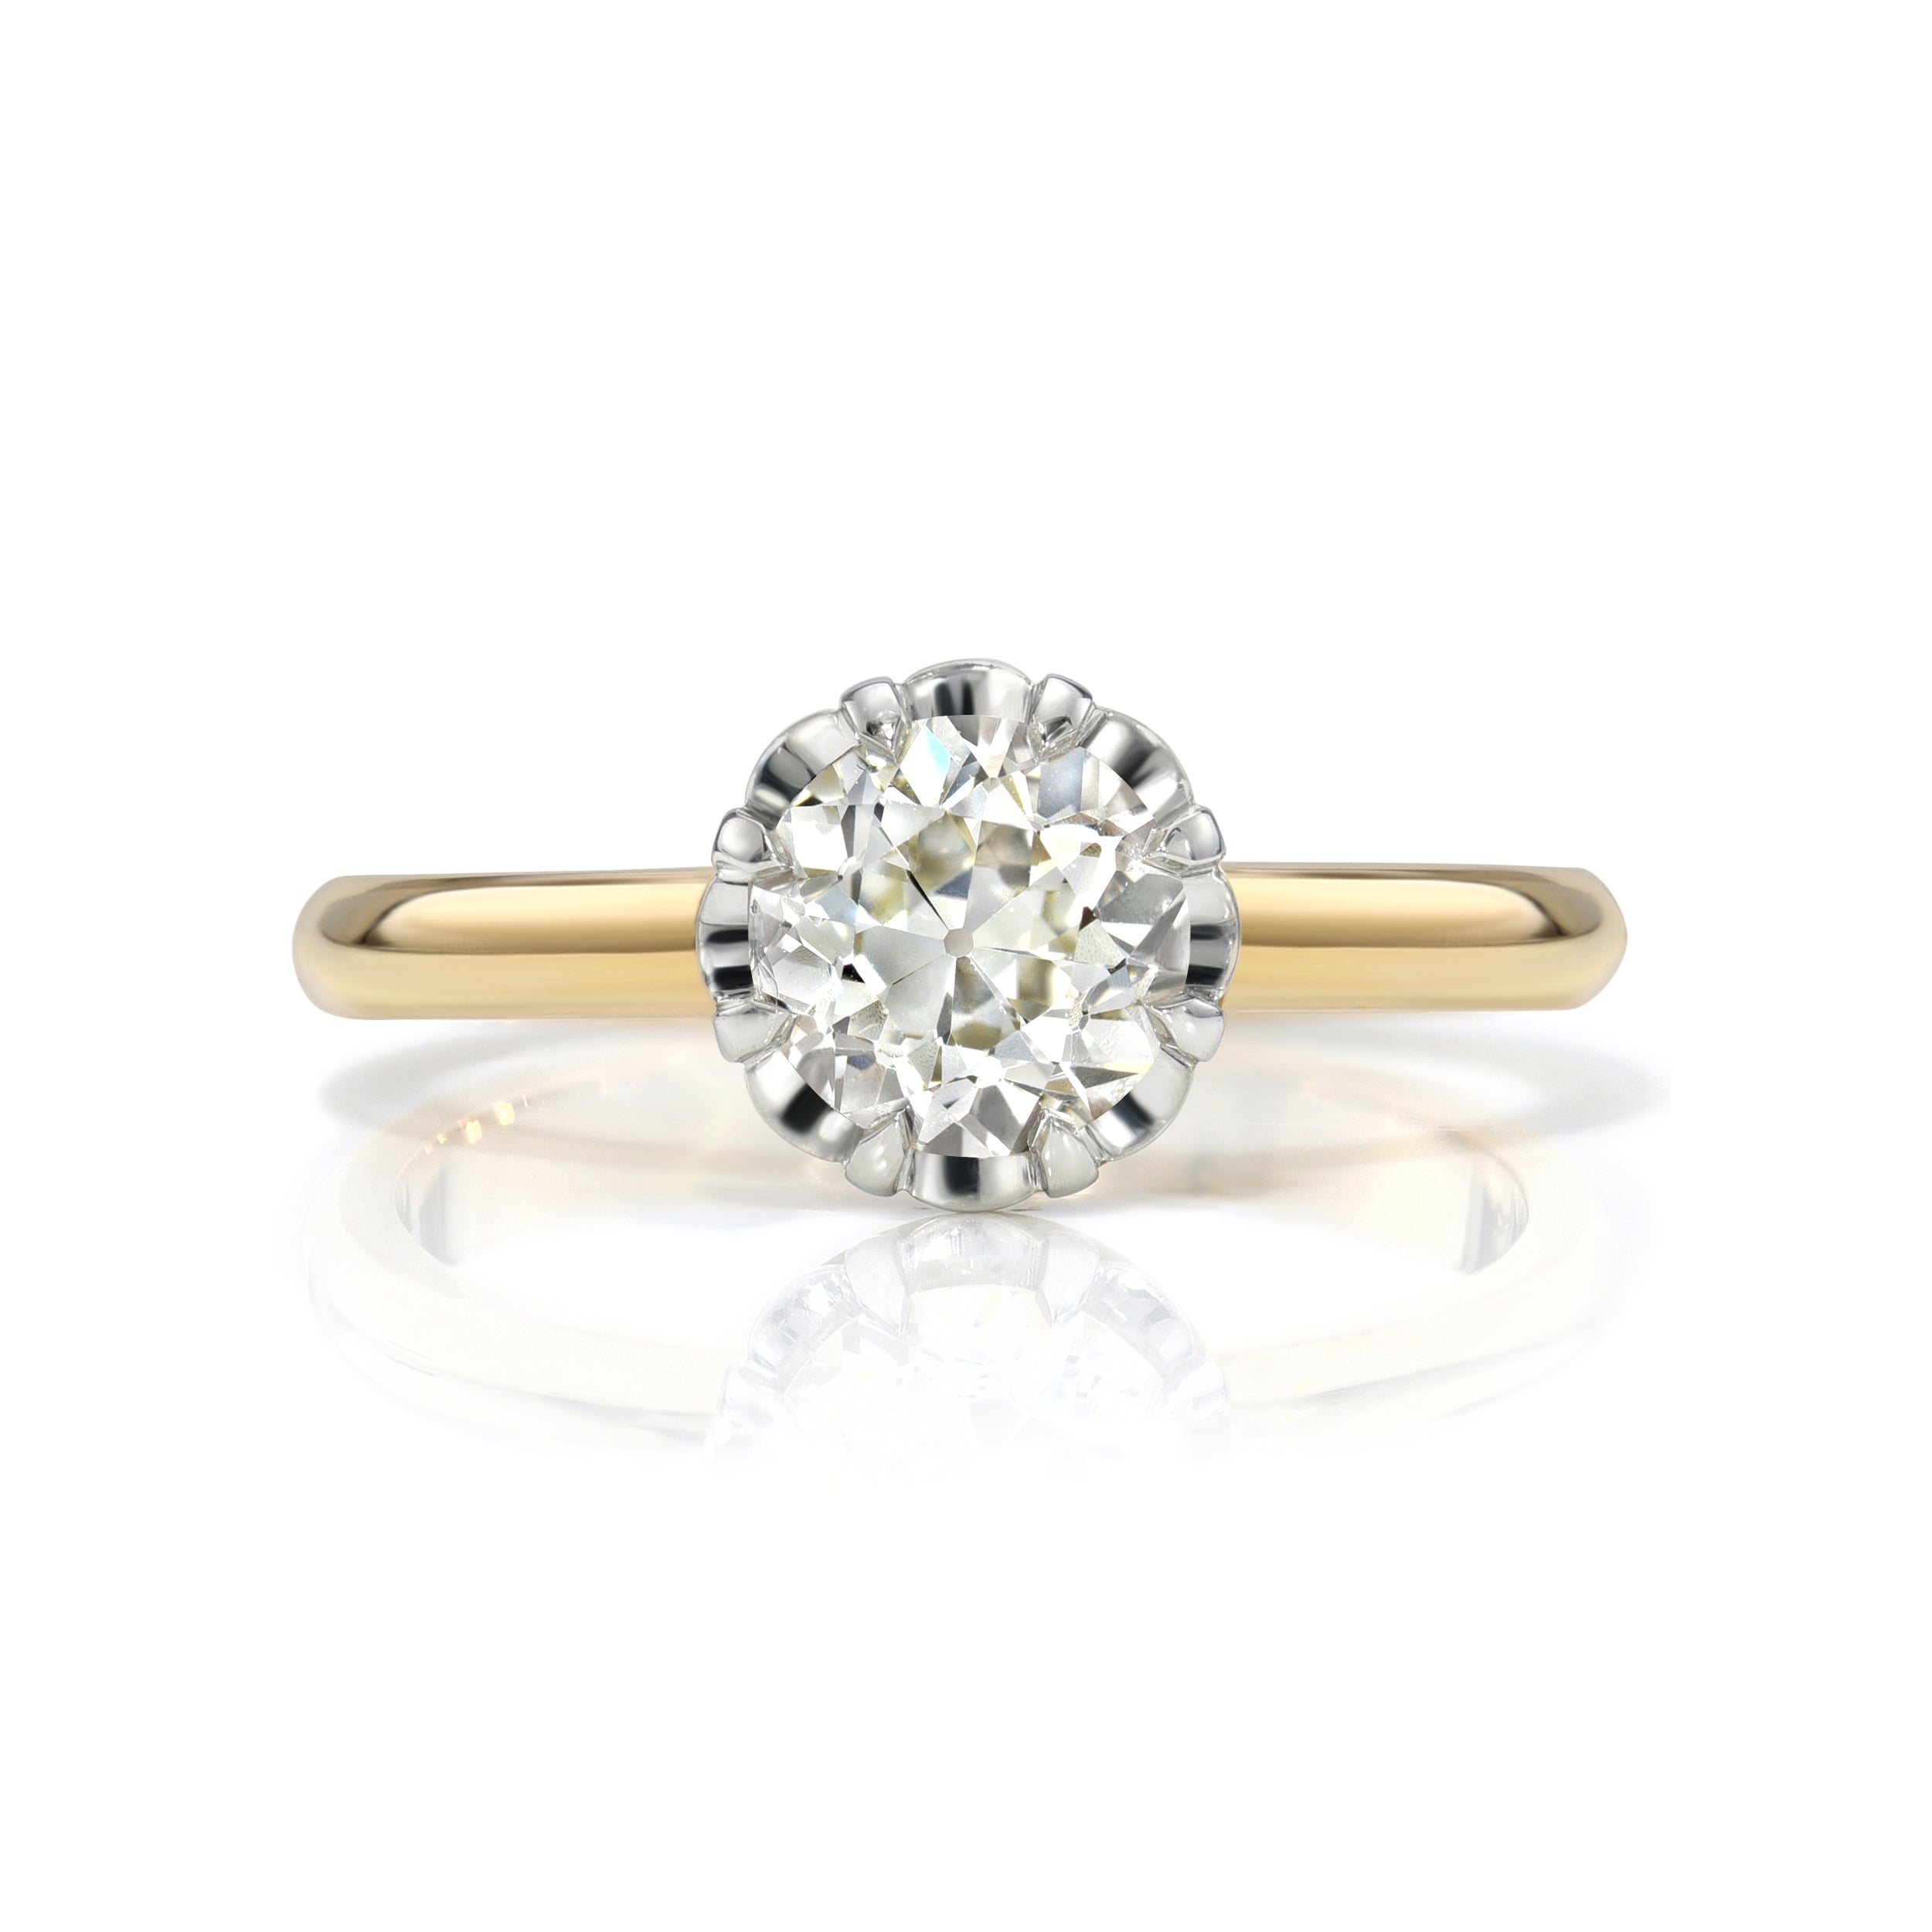 SINGLE STONE JOSILYN RING featuring 1.00ct L/SI2 GIA certified old European cut diamond set in a handcrafted platinum and 18K yellow gold mounting.